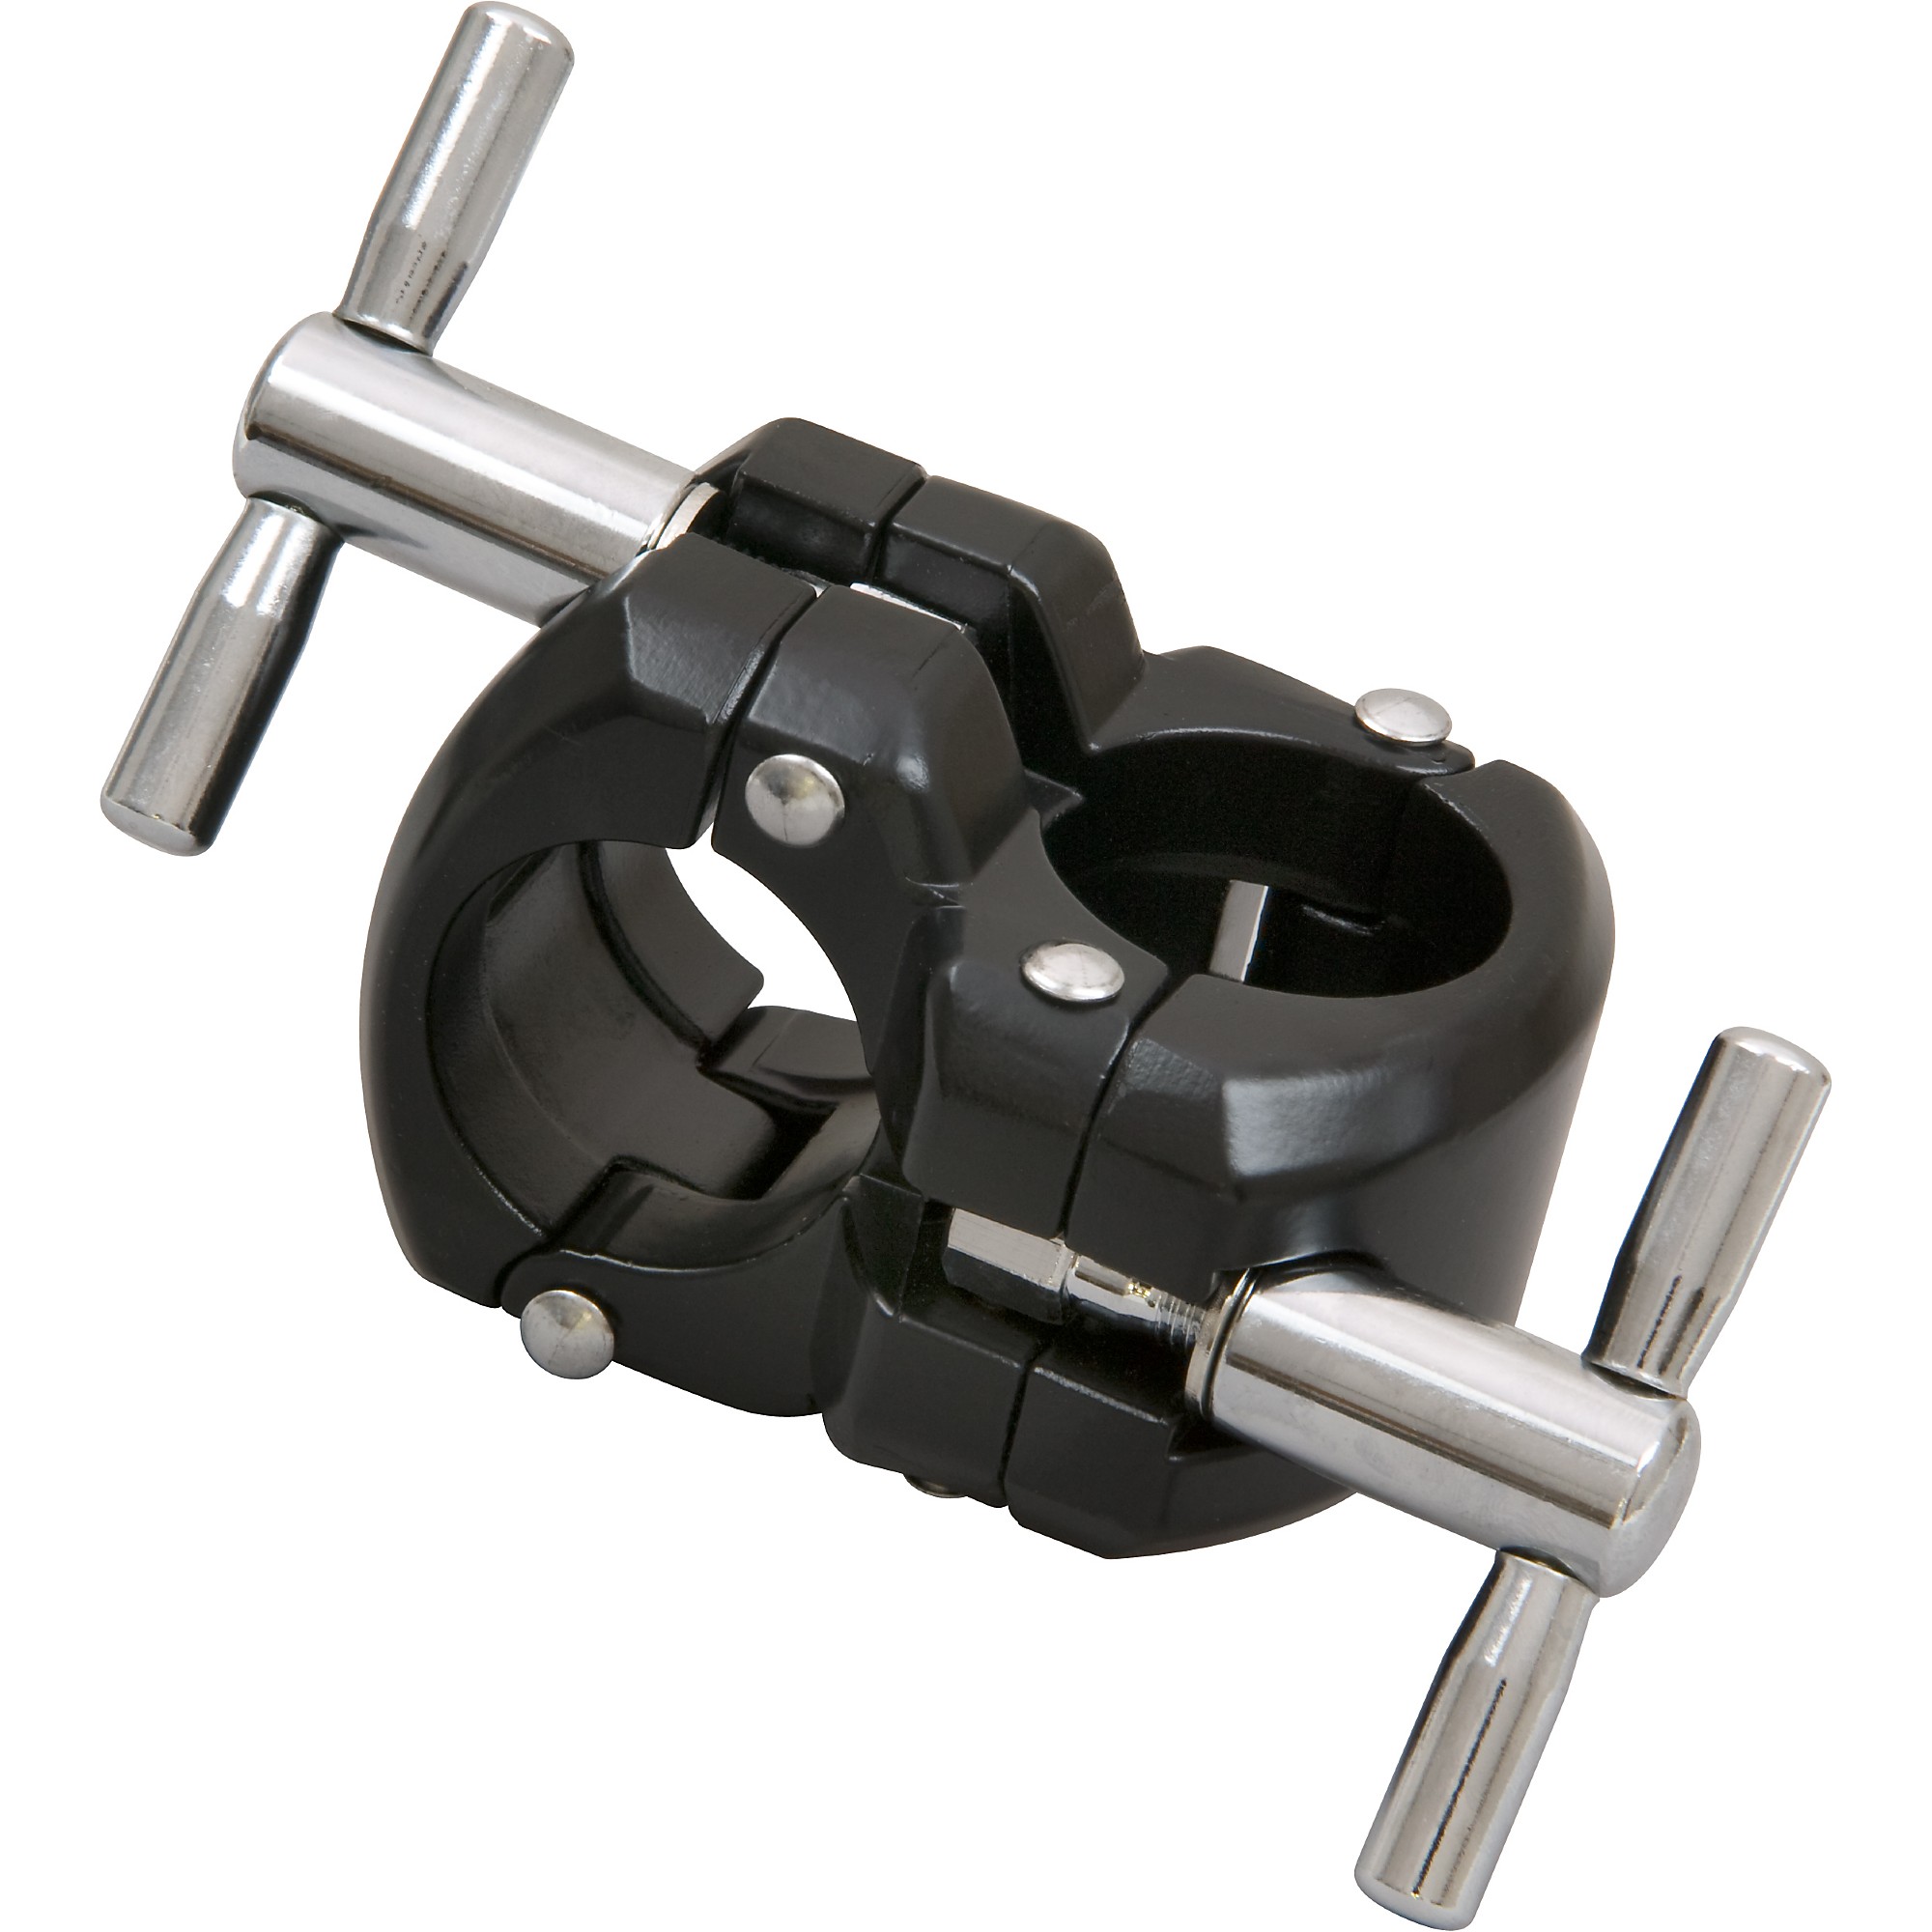 SPR03 Right-Angle Rack Clamp